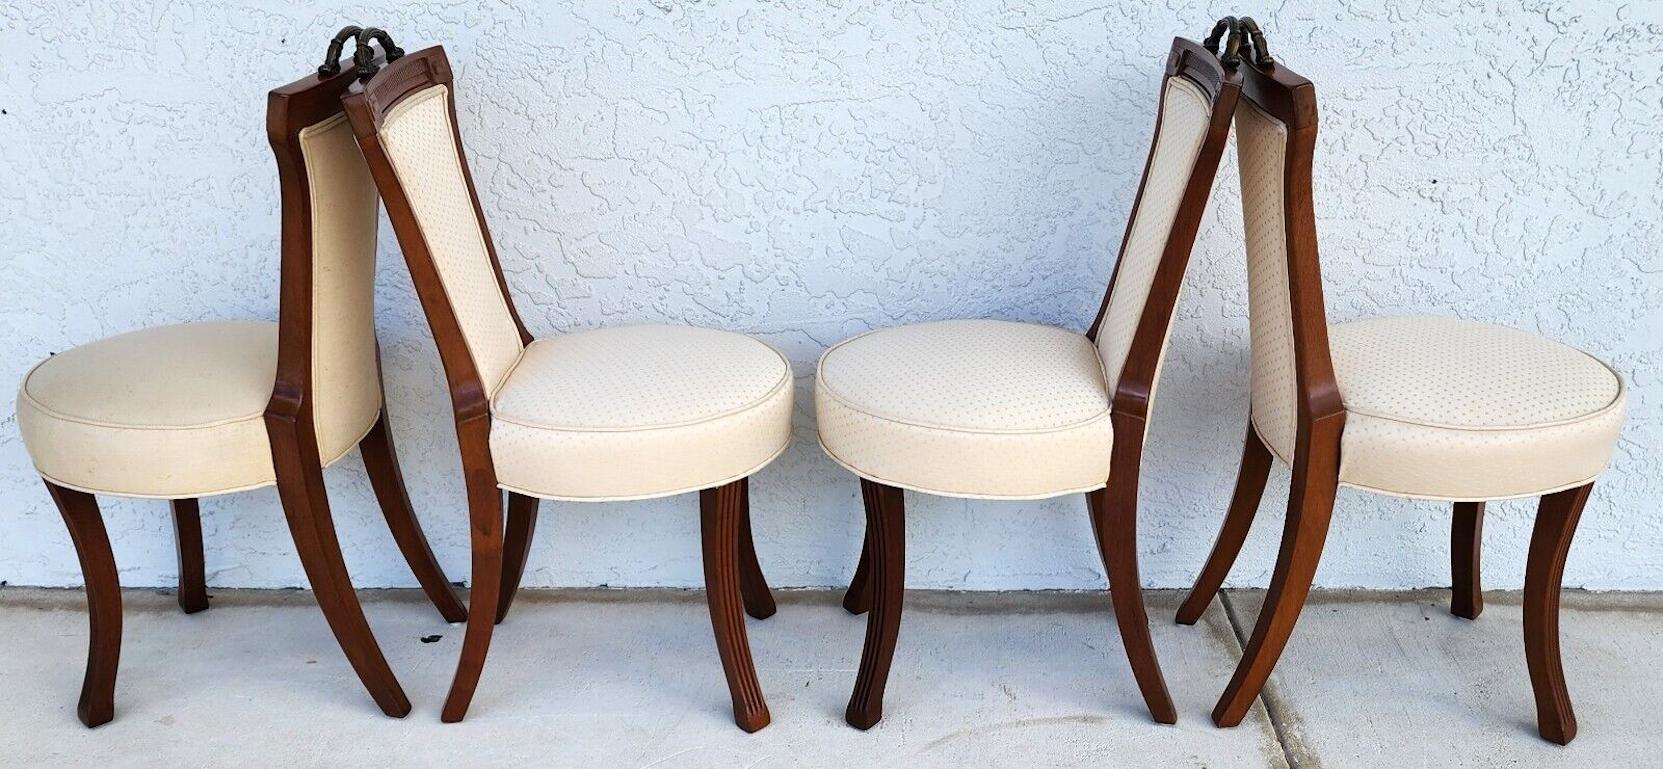 Antique Dining Chairs Set of 4 In Good Condition For Sale In Lake Worth, FL